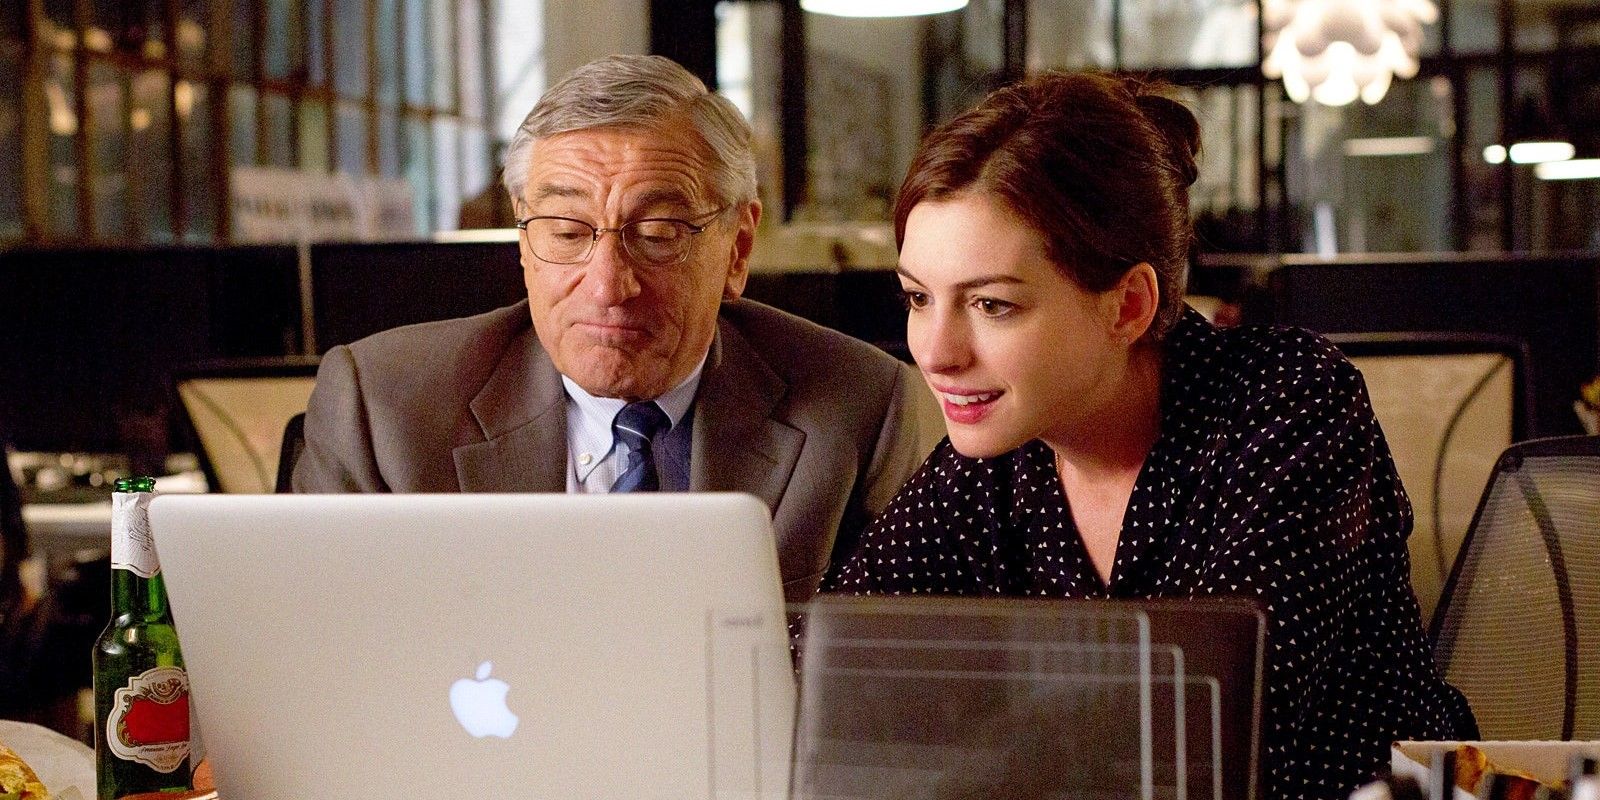 Anne Hathaway and Robert De Niro use a computer in The Intern 